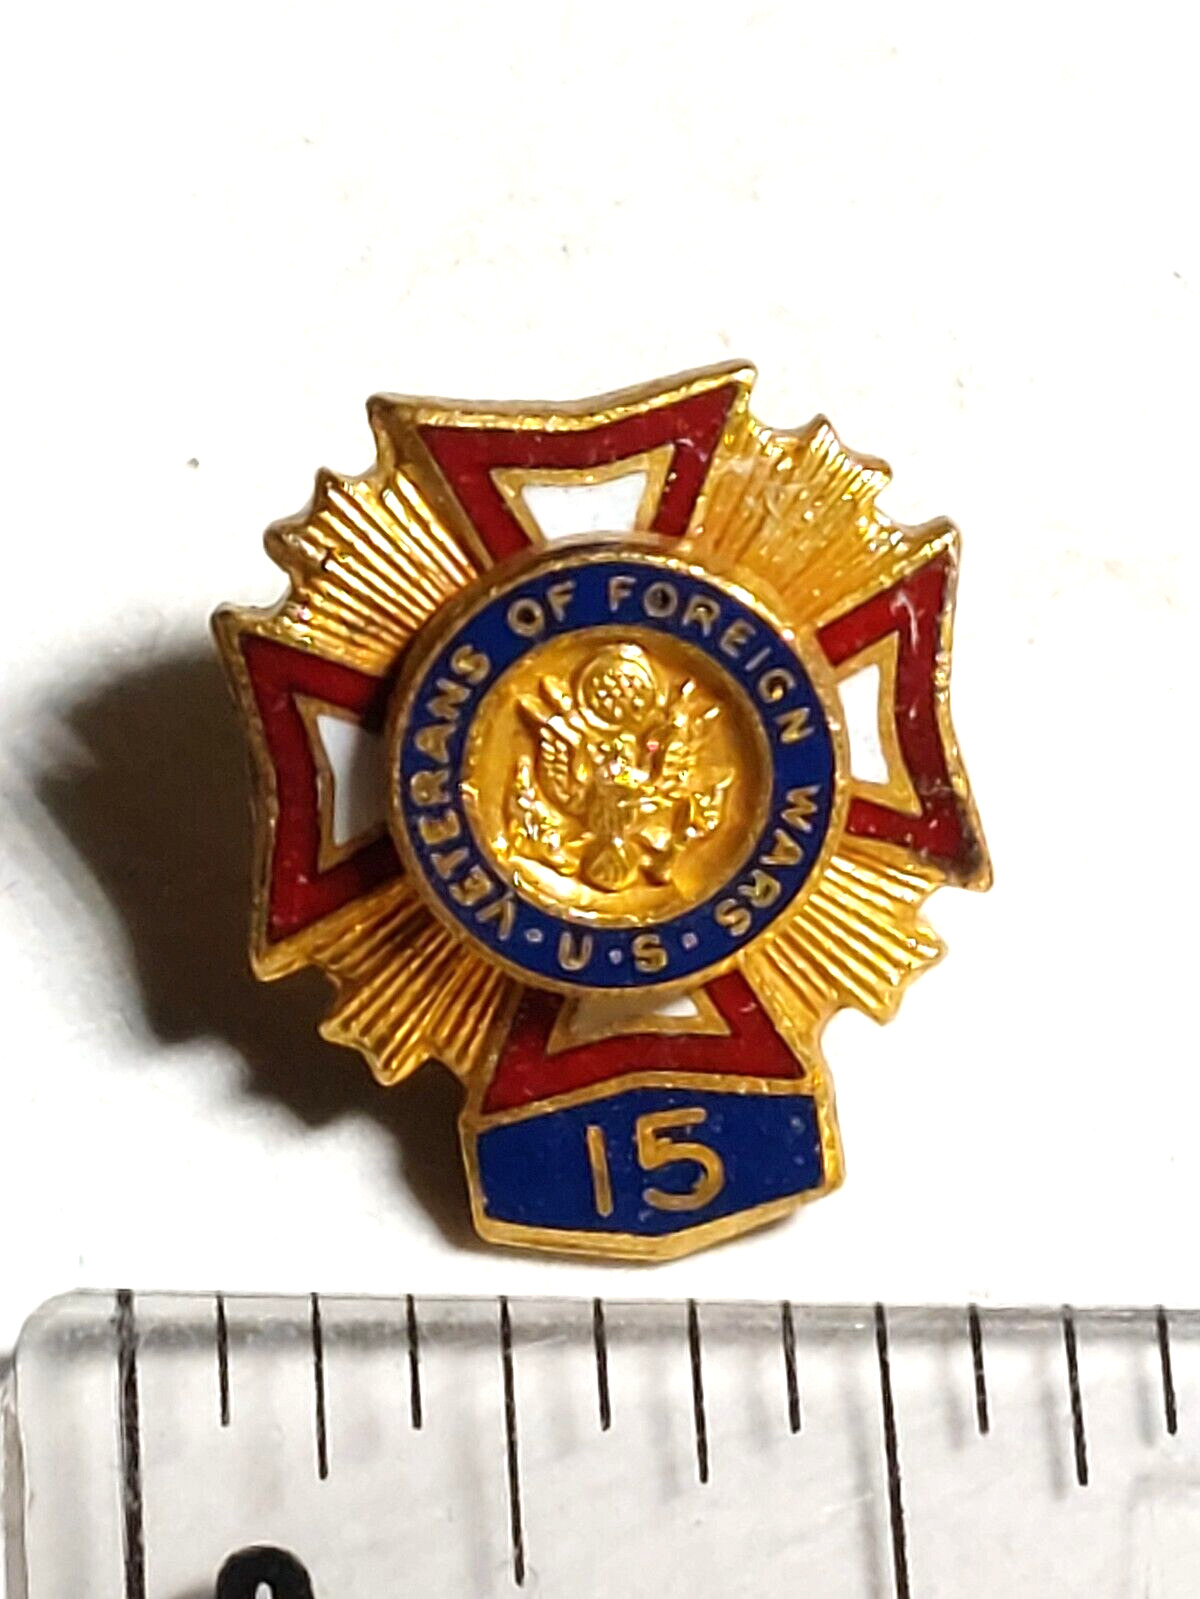 VFW (Veterans of Foreign Wars) 15 Year Tie Tac or Lapel Pin (042823)